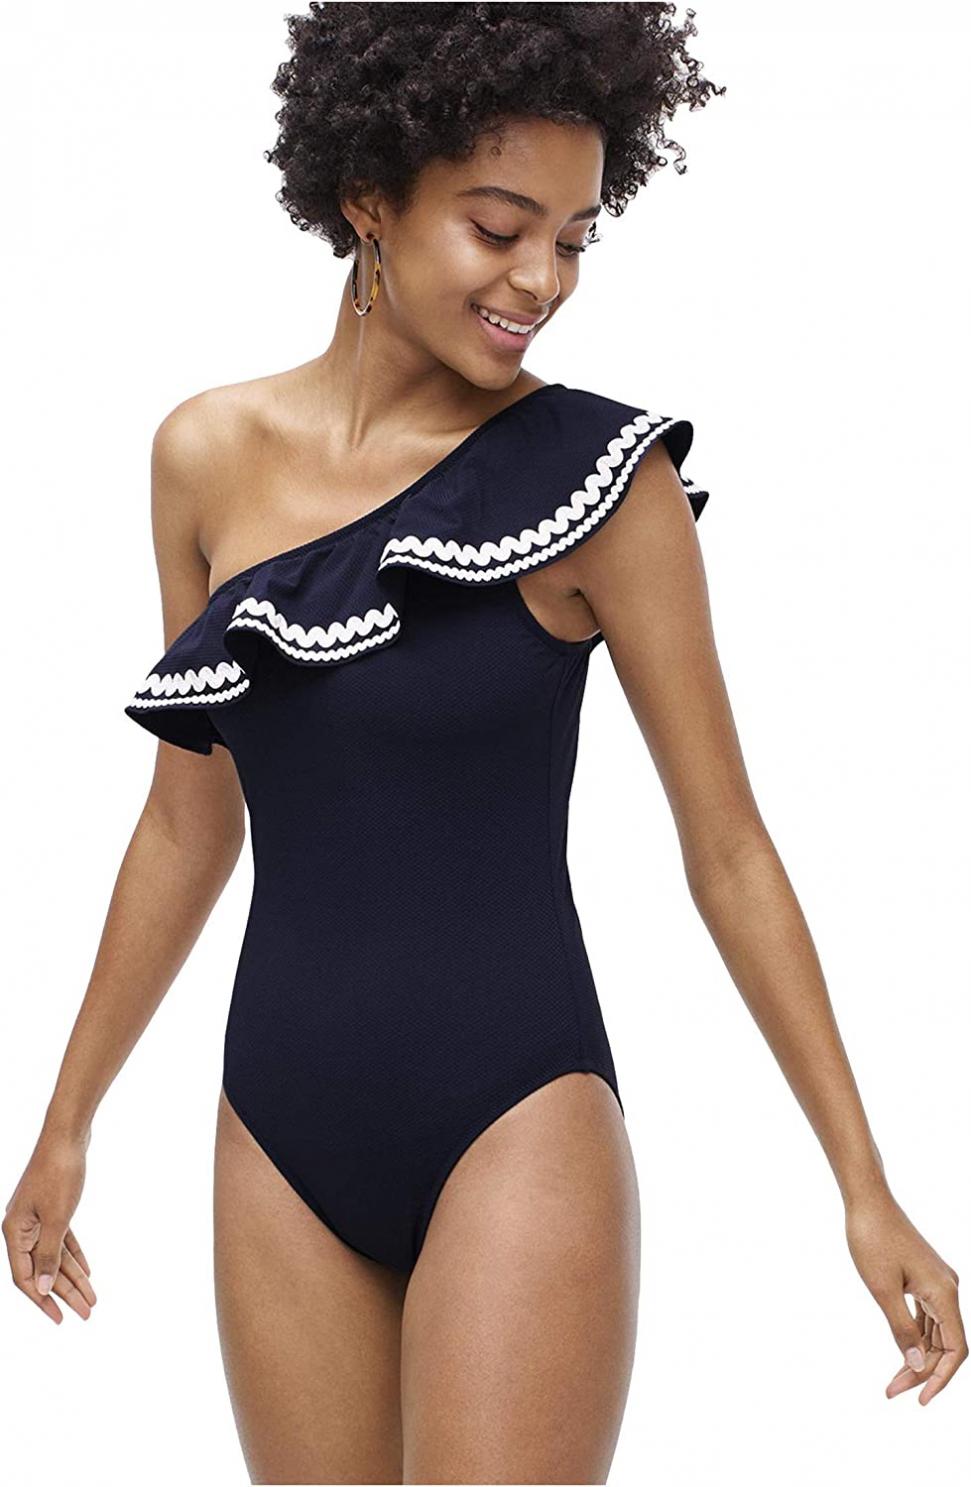 J.Crew One-Shoulder Ruffle One-Piece Swimsuit with Rickrack Navy 8